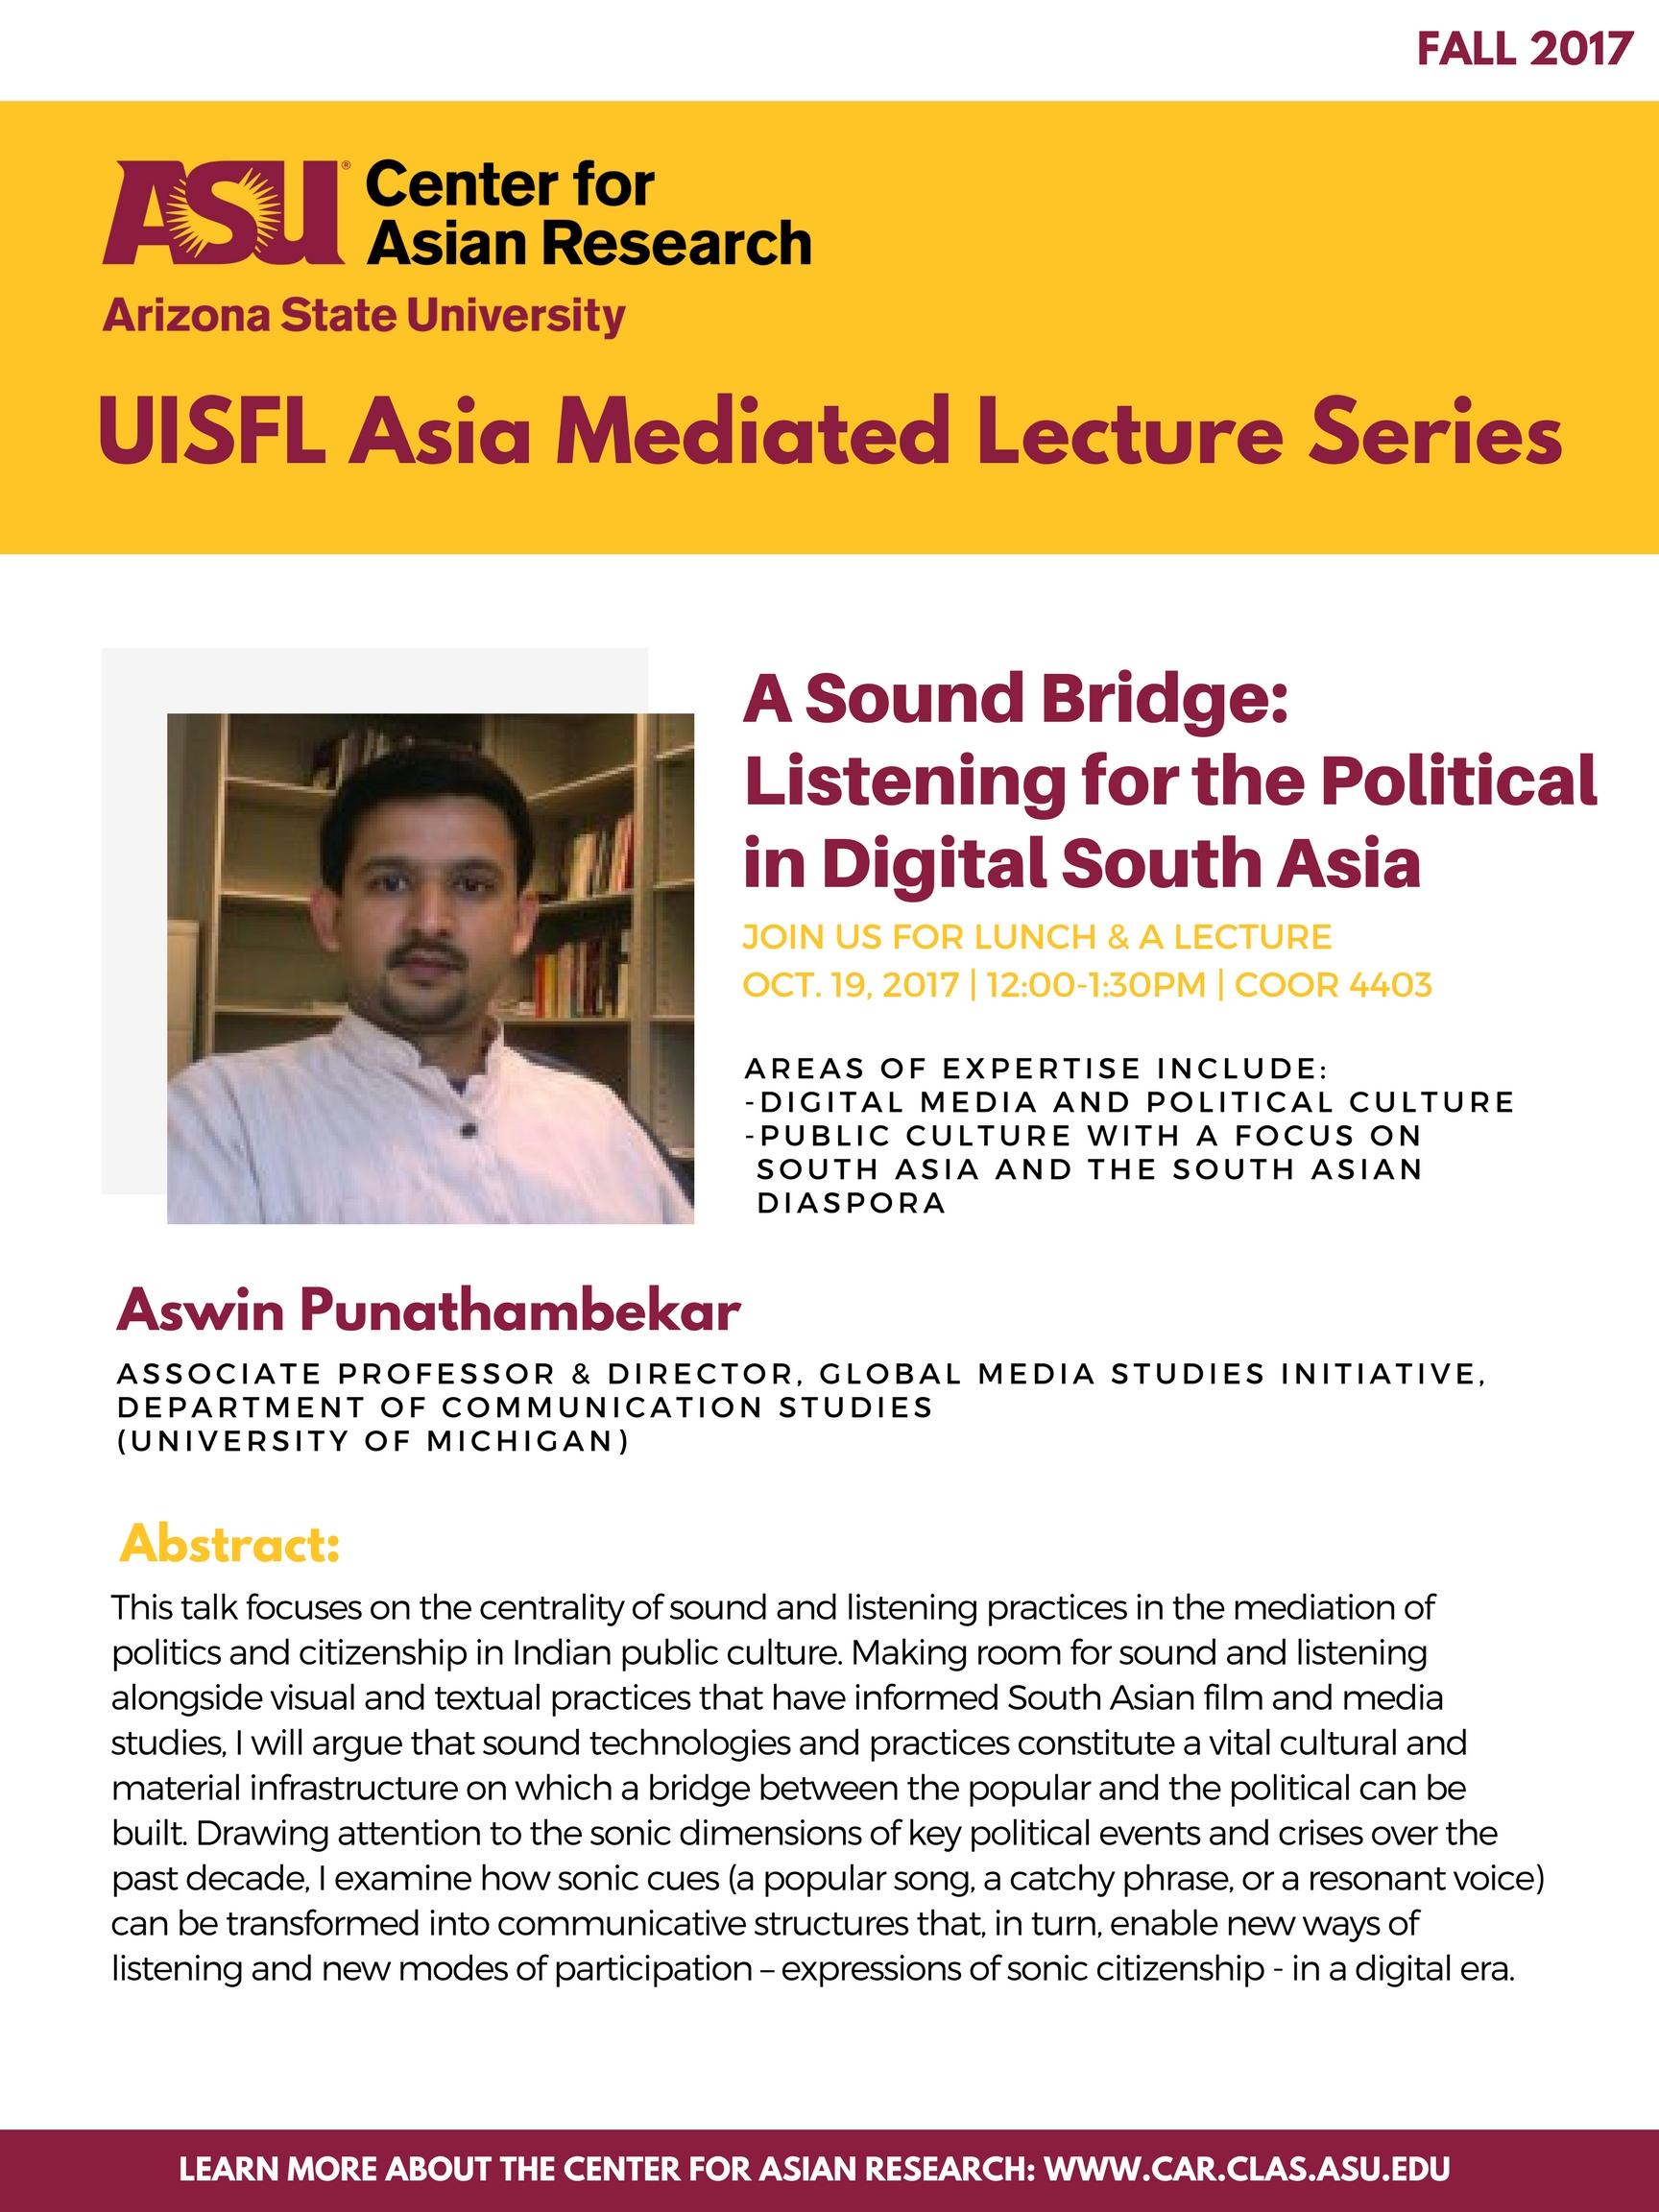 Asia Mediated Lecture Series: A Sound Bridge poster